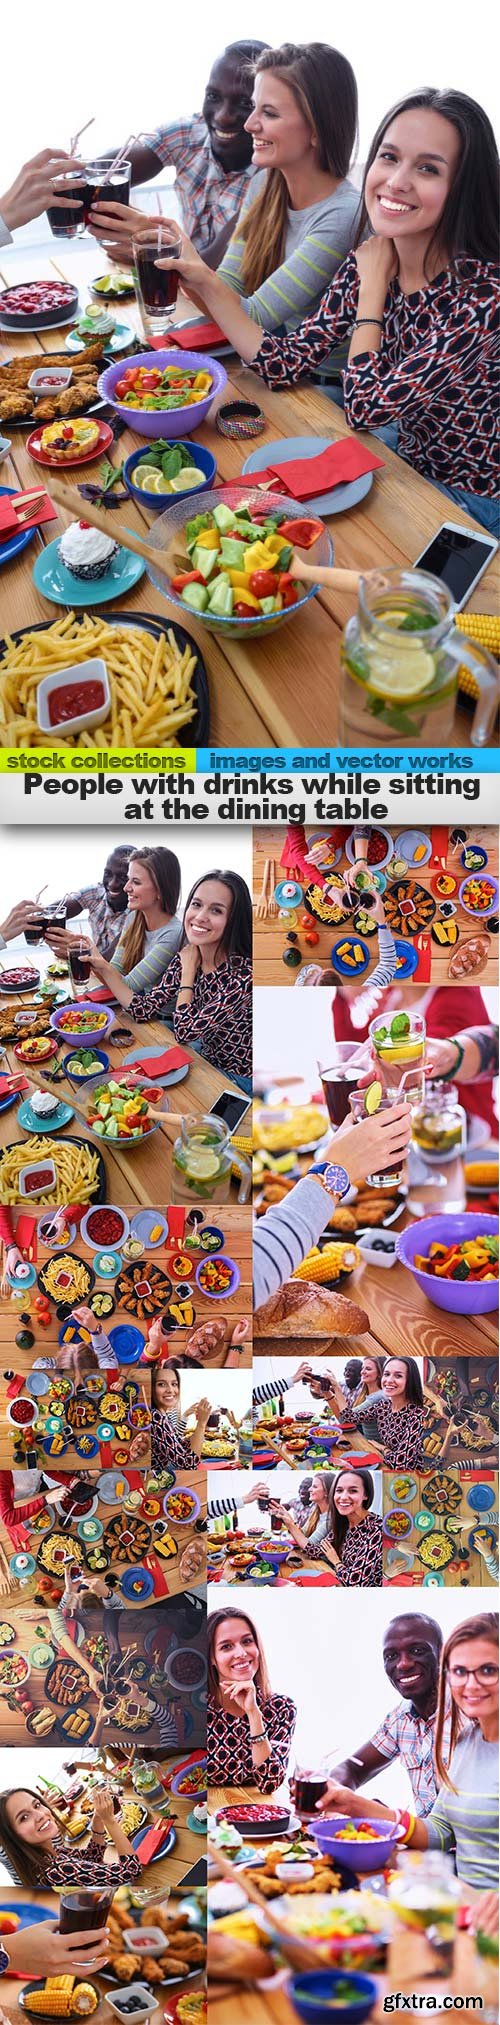 People with drinks while sitting at the dining table, 15 x UHQ JPEG